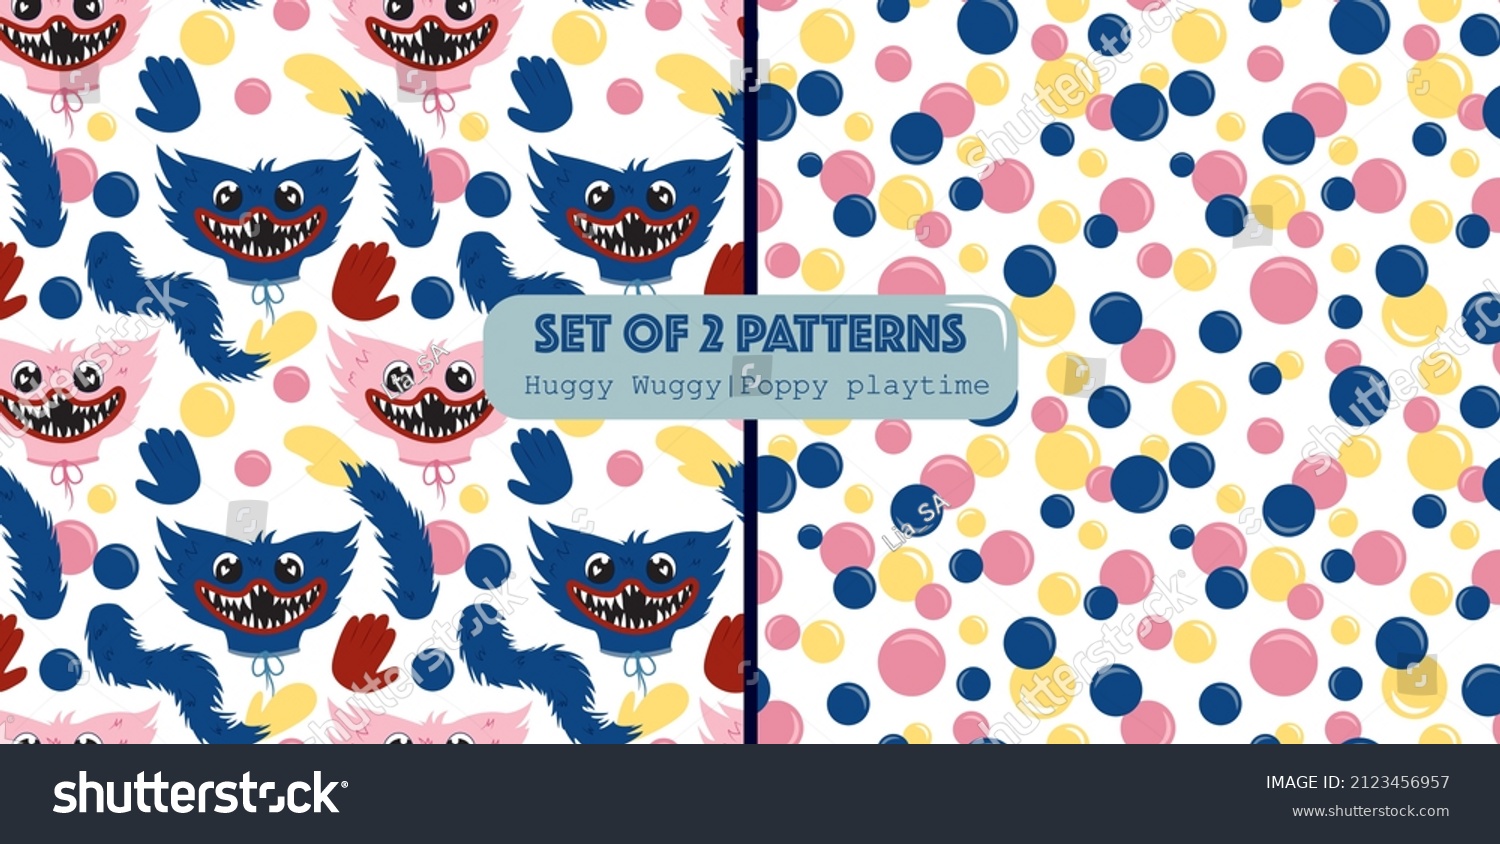 SVG of A set of seamless patterns about the game poppy playtime. Huggy Wuggy and Kissy Missy toy characters. 2 hand drawn patterns with popular characters and balls. Funny children's patterns with monsters.  svg